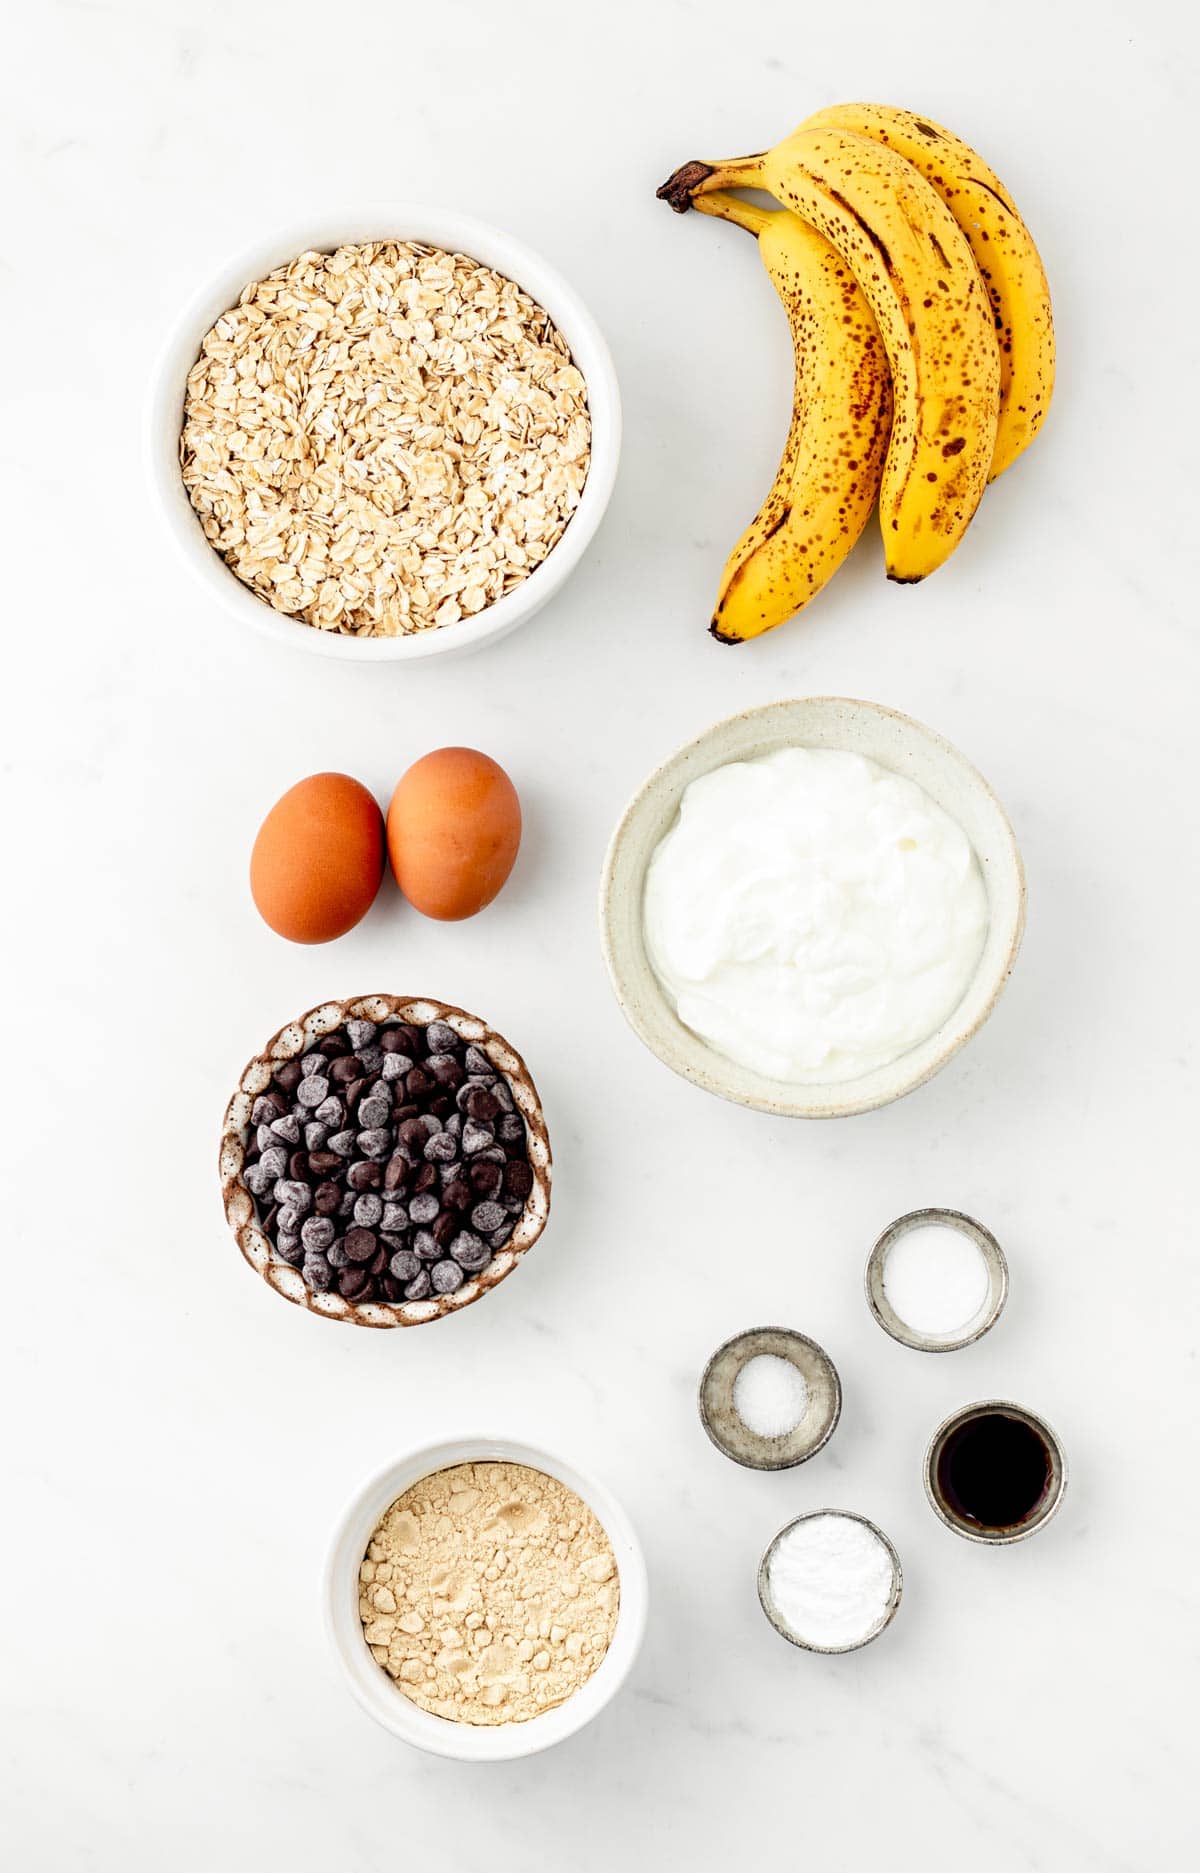 Ingredients for protein banana bread recipe.